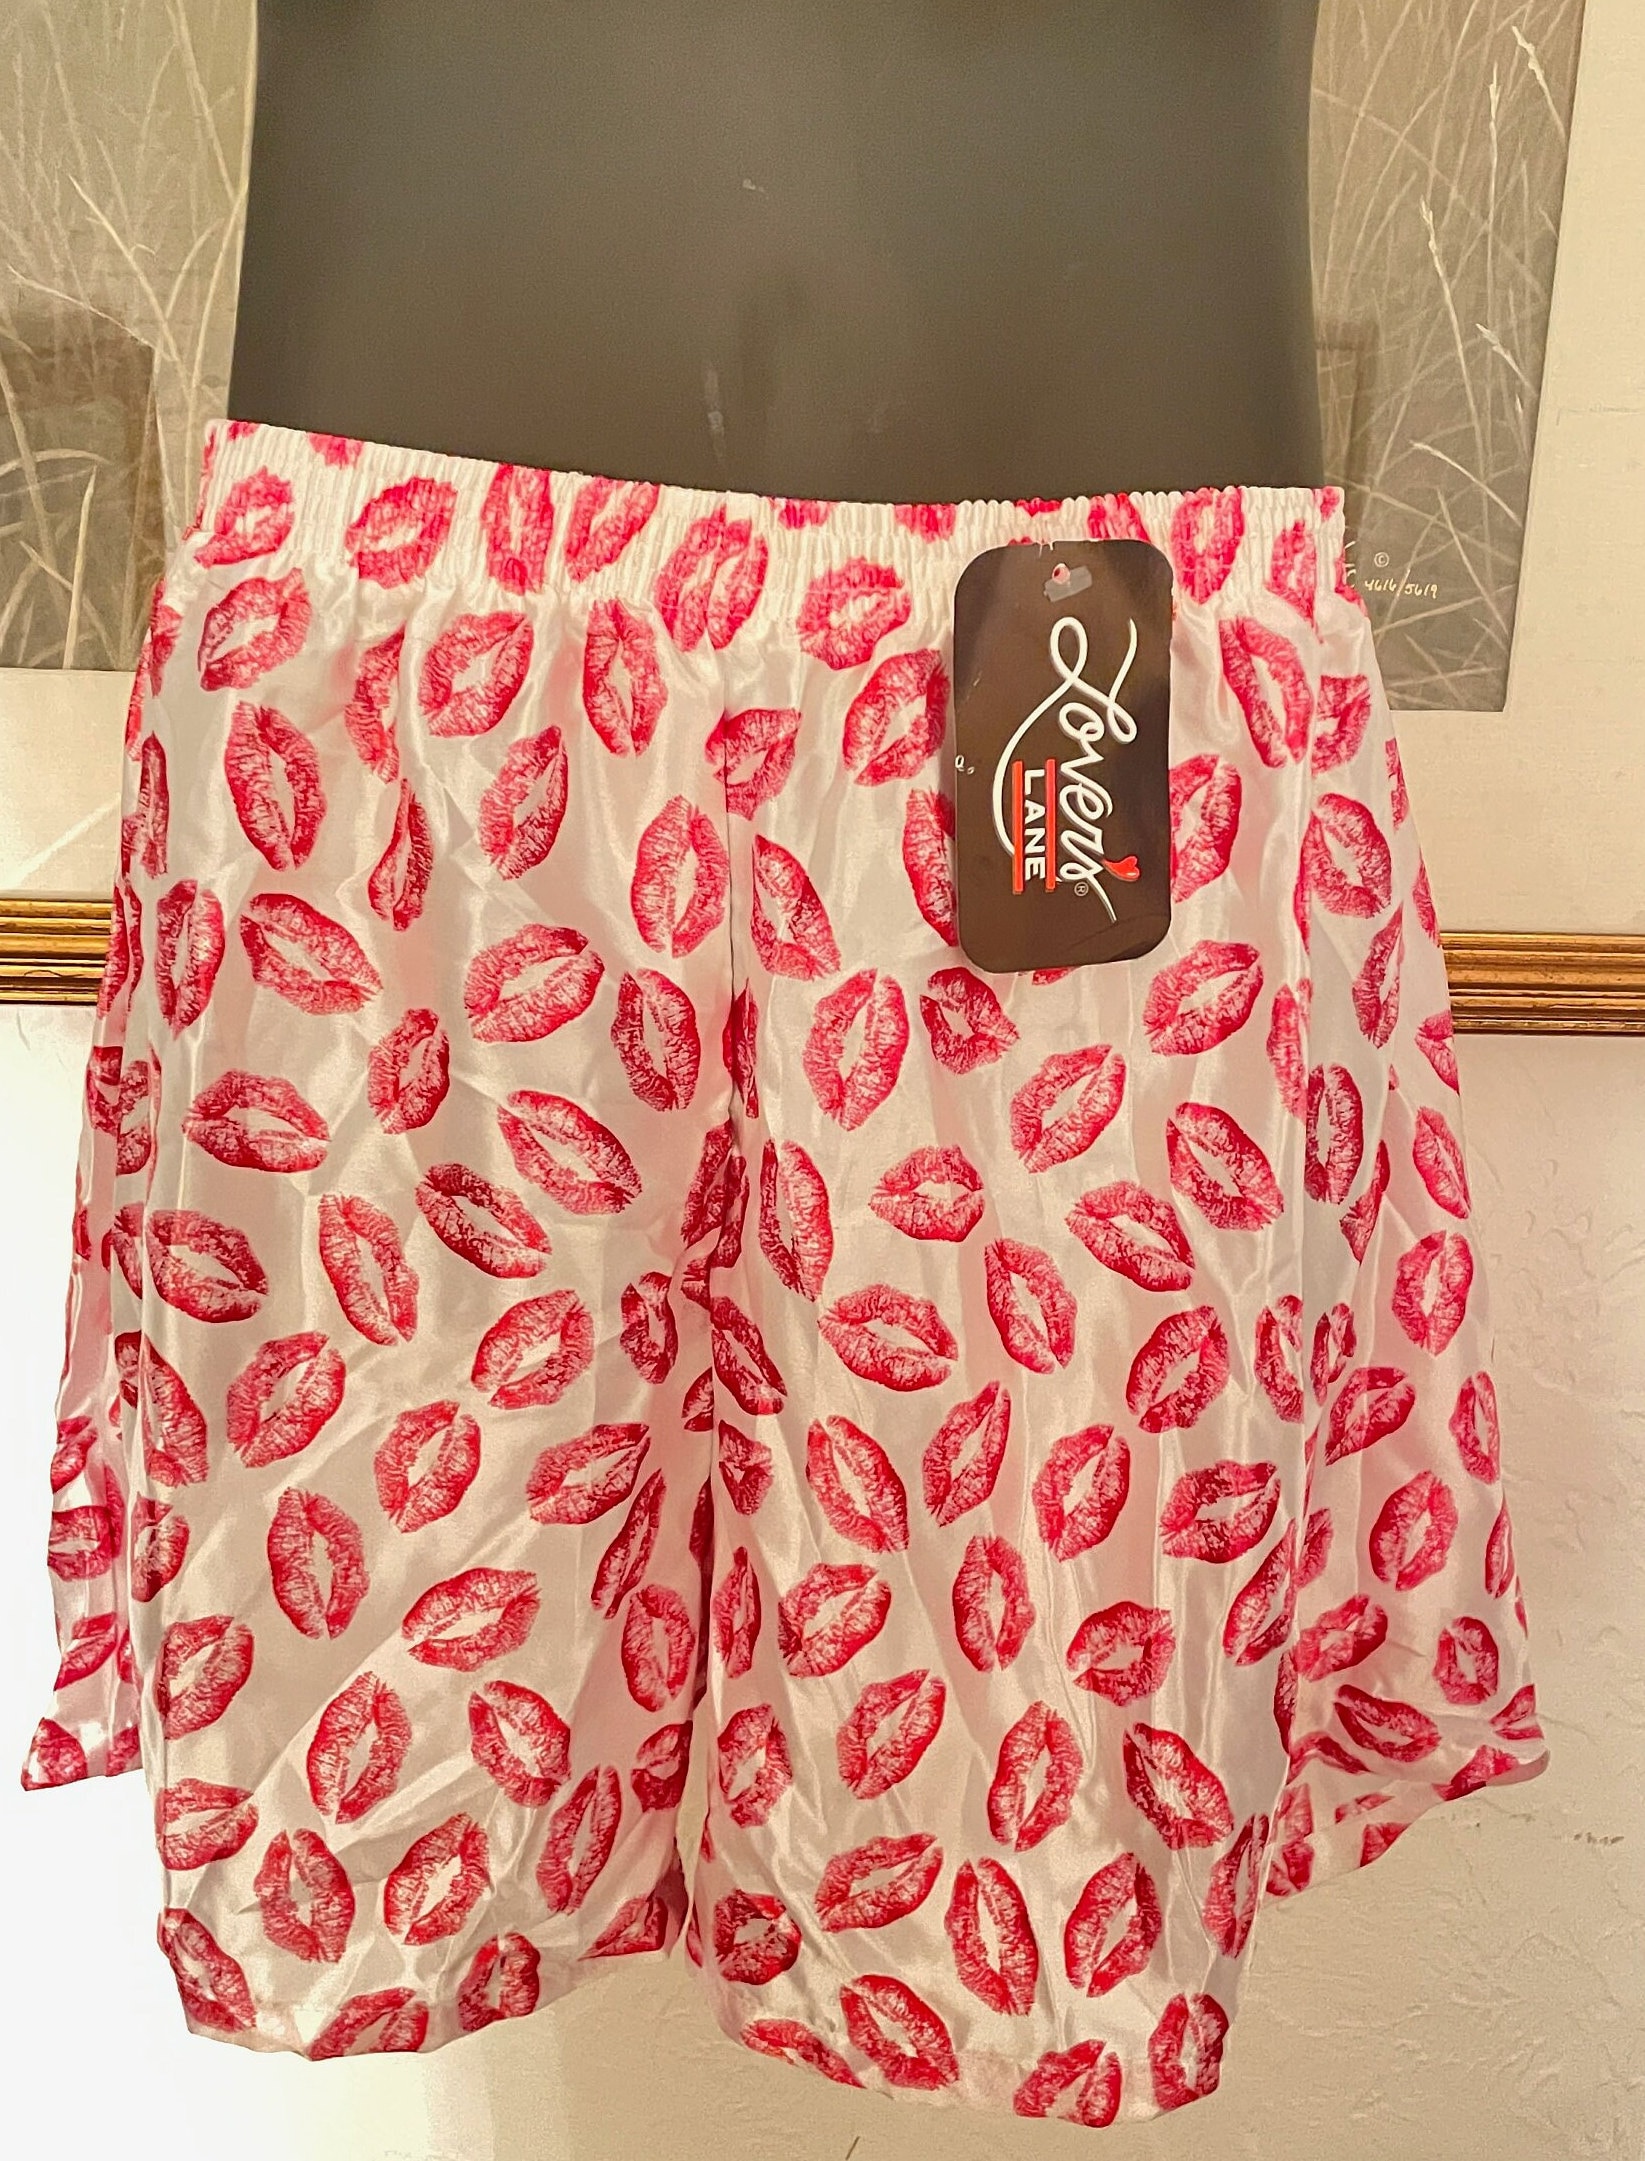 Your Face on Custom Men's Boxers With Red Lips, Personalized Funny